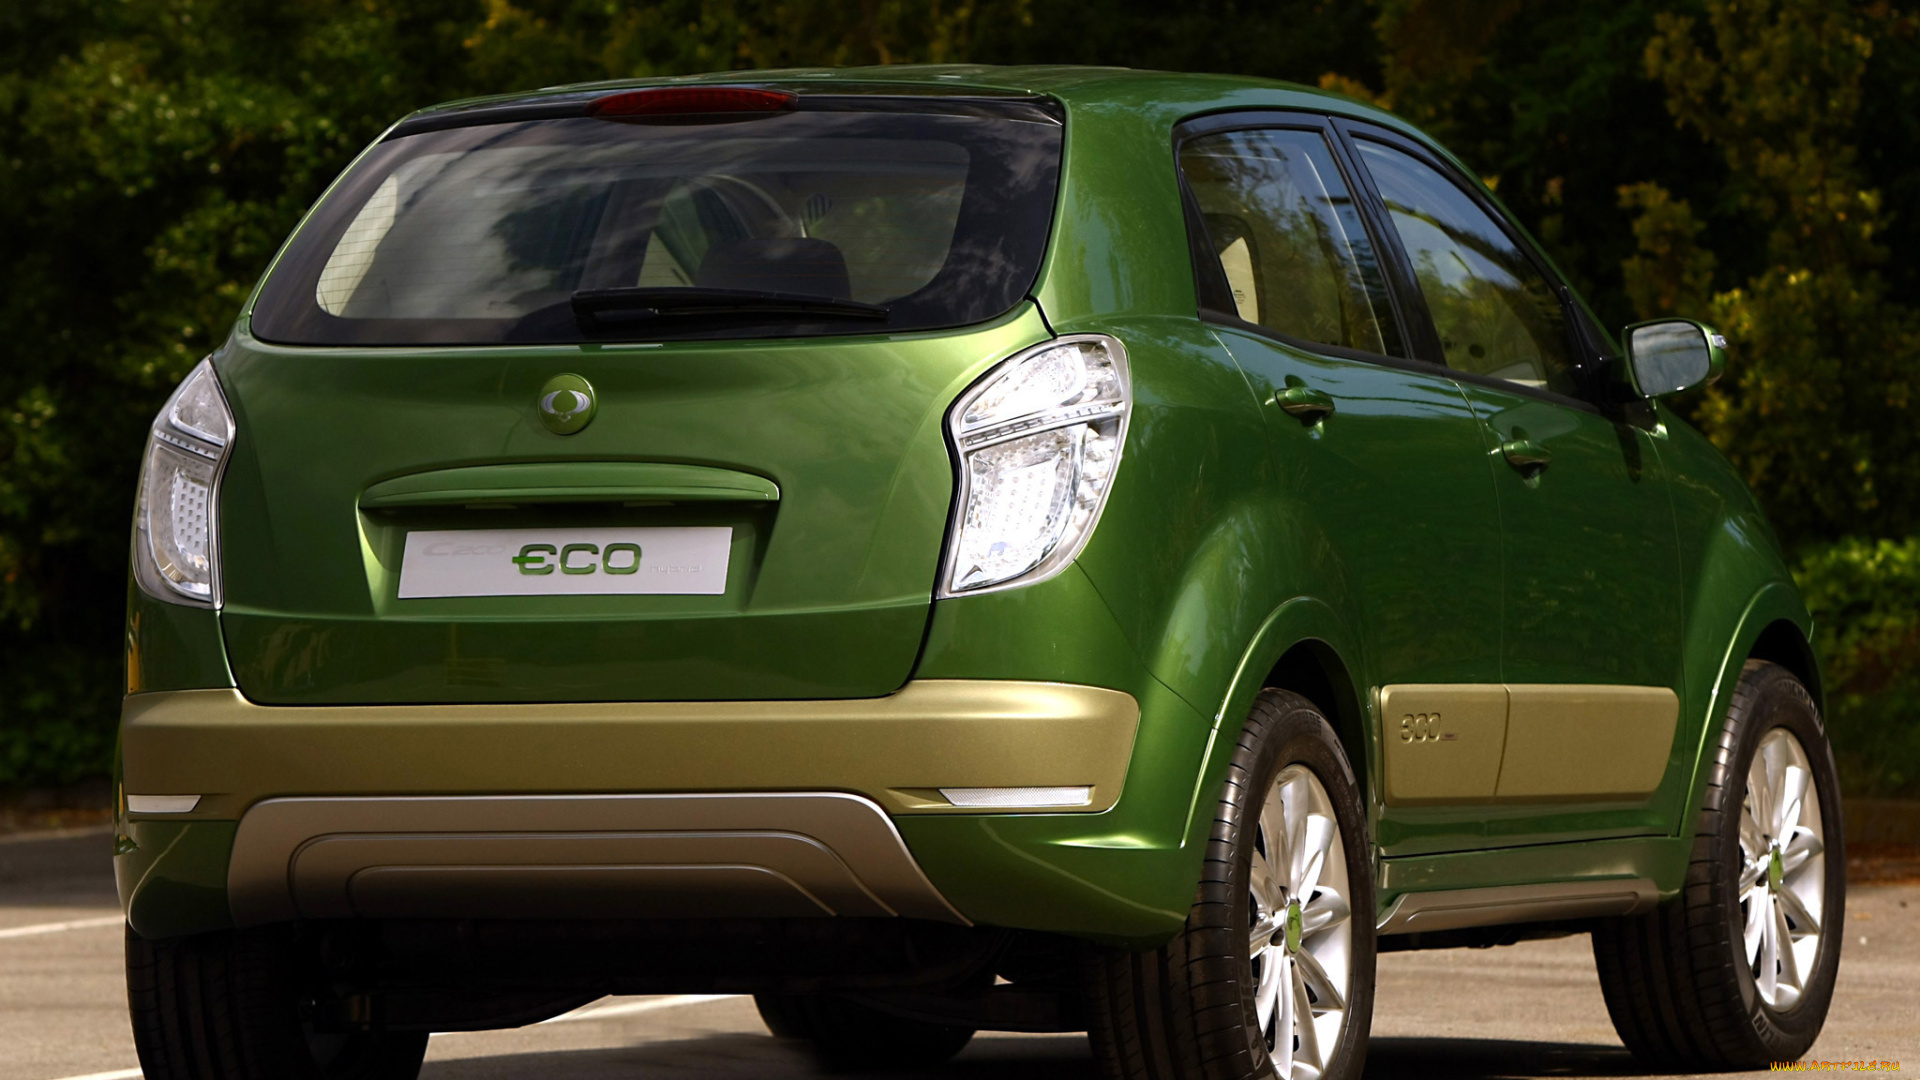 ssang, yong, c200, eco, hybrid, concept, 2009, автомобили, ssang, yong, ssang, yong, c200, eco, hybrid, concept, 2009